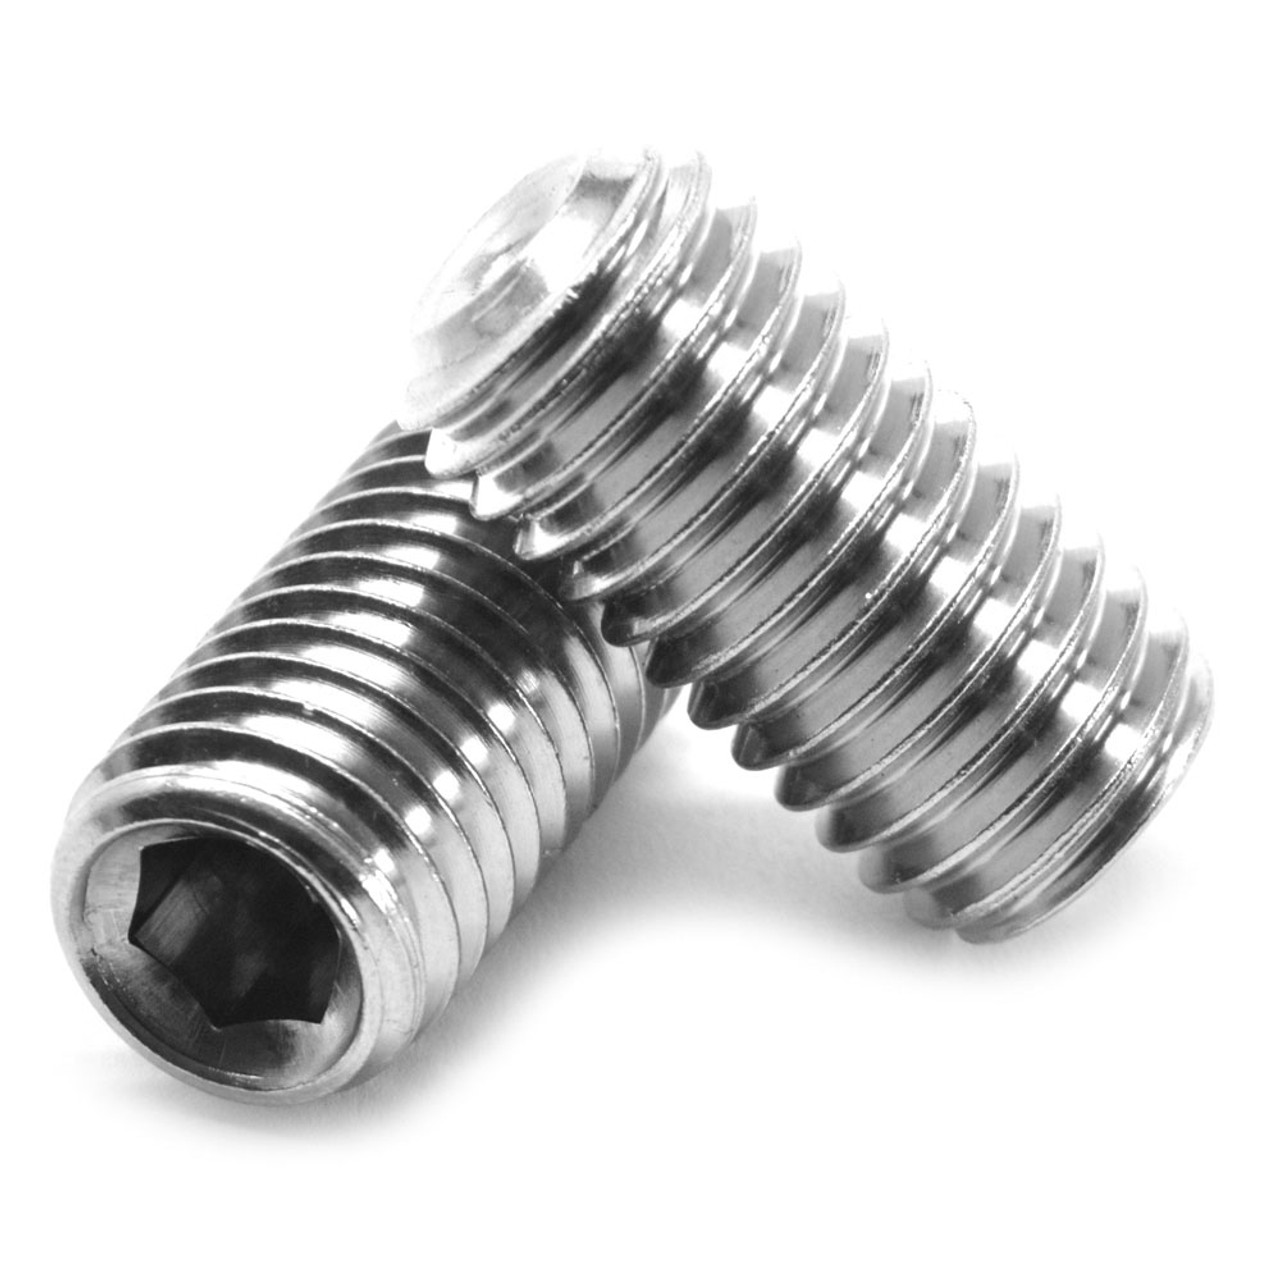 5/16"-24 x 1 1/4" Fine Thread Socket Set Screw Cup Point Stainless Steel 18-8